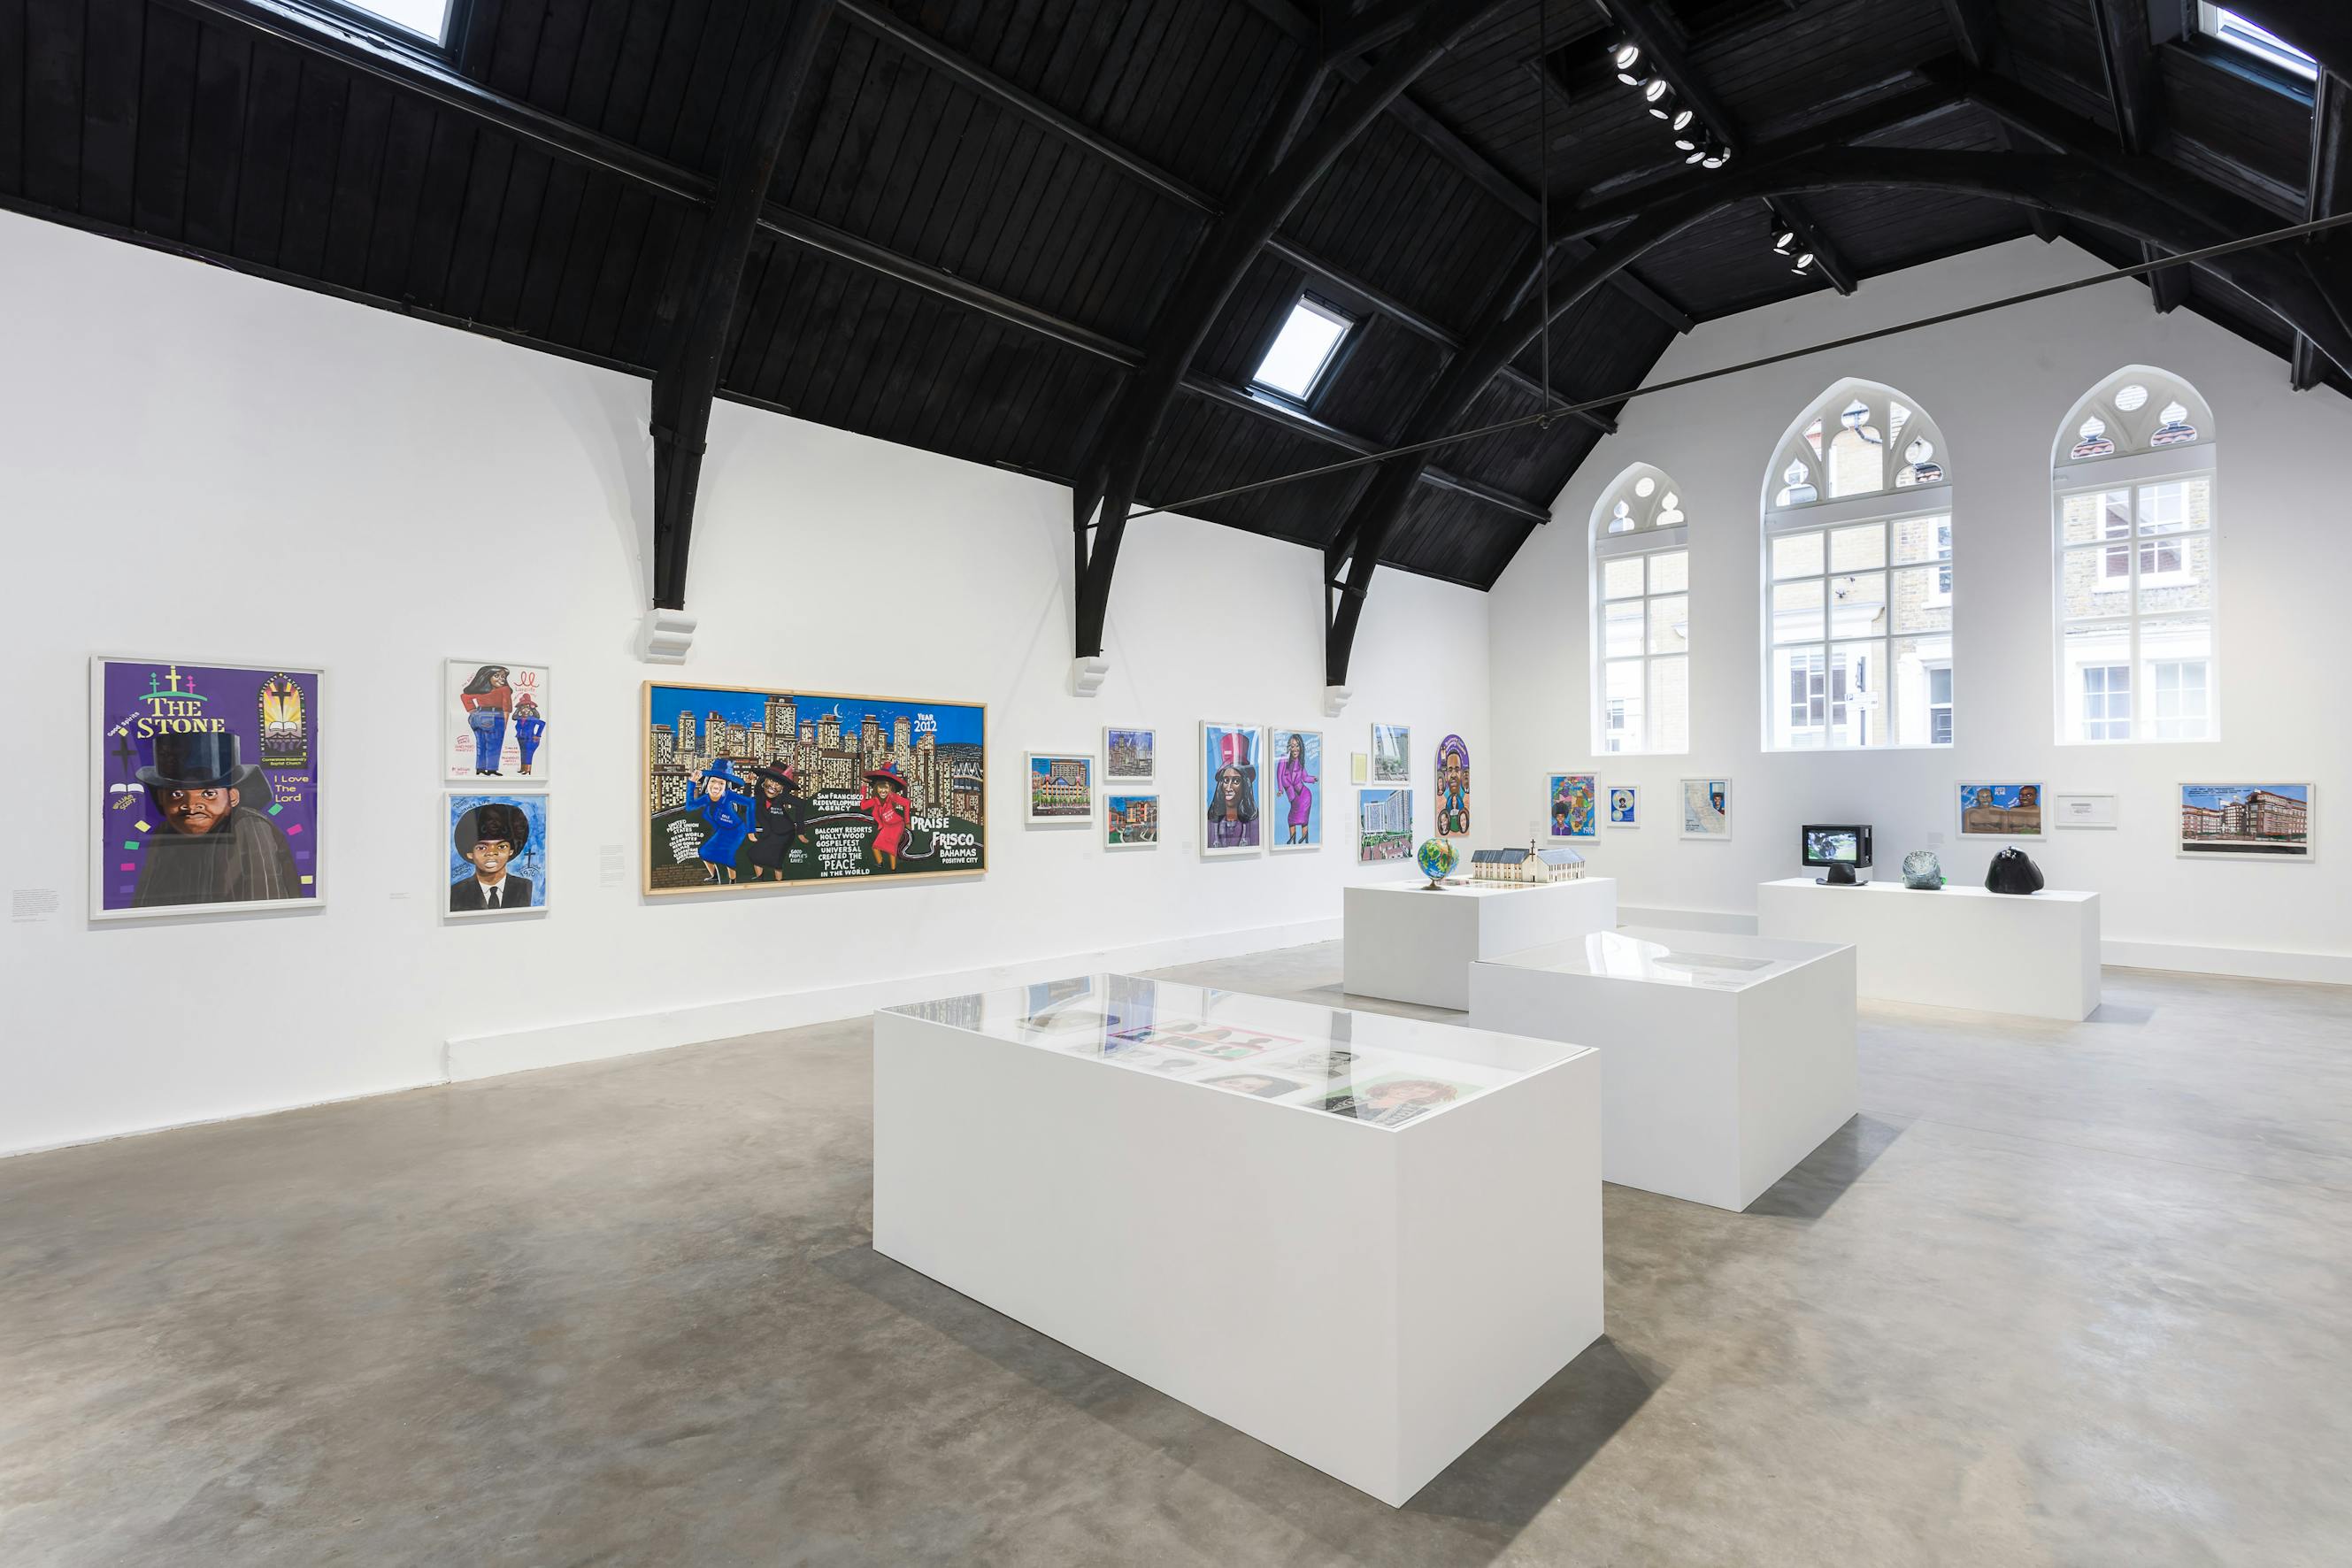 a gallery with white walls and a black vaulted roof. In the middle of the room there are square vitrines with glass tops. Artworks of various painted public figures are mounted on the walls in the background.